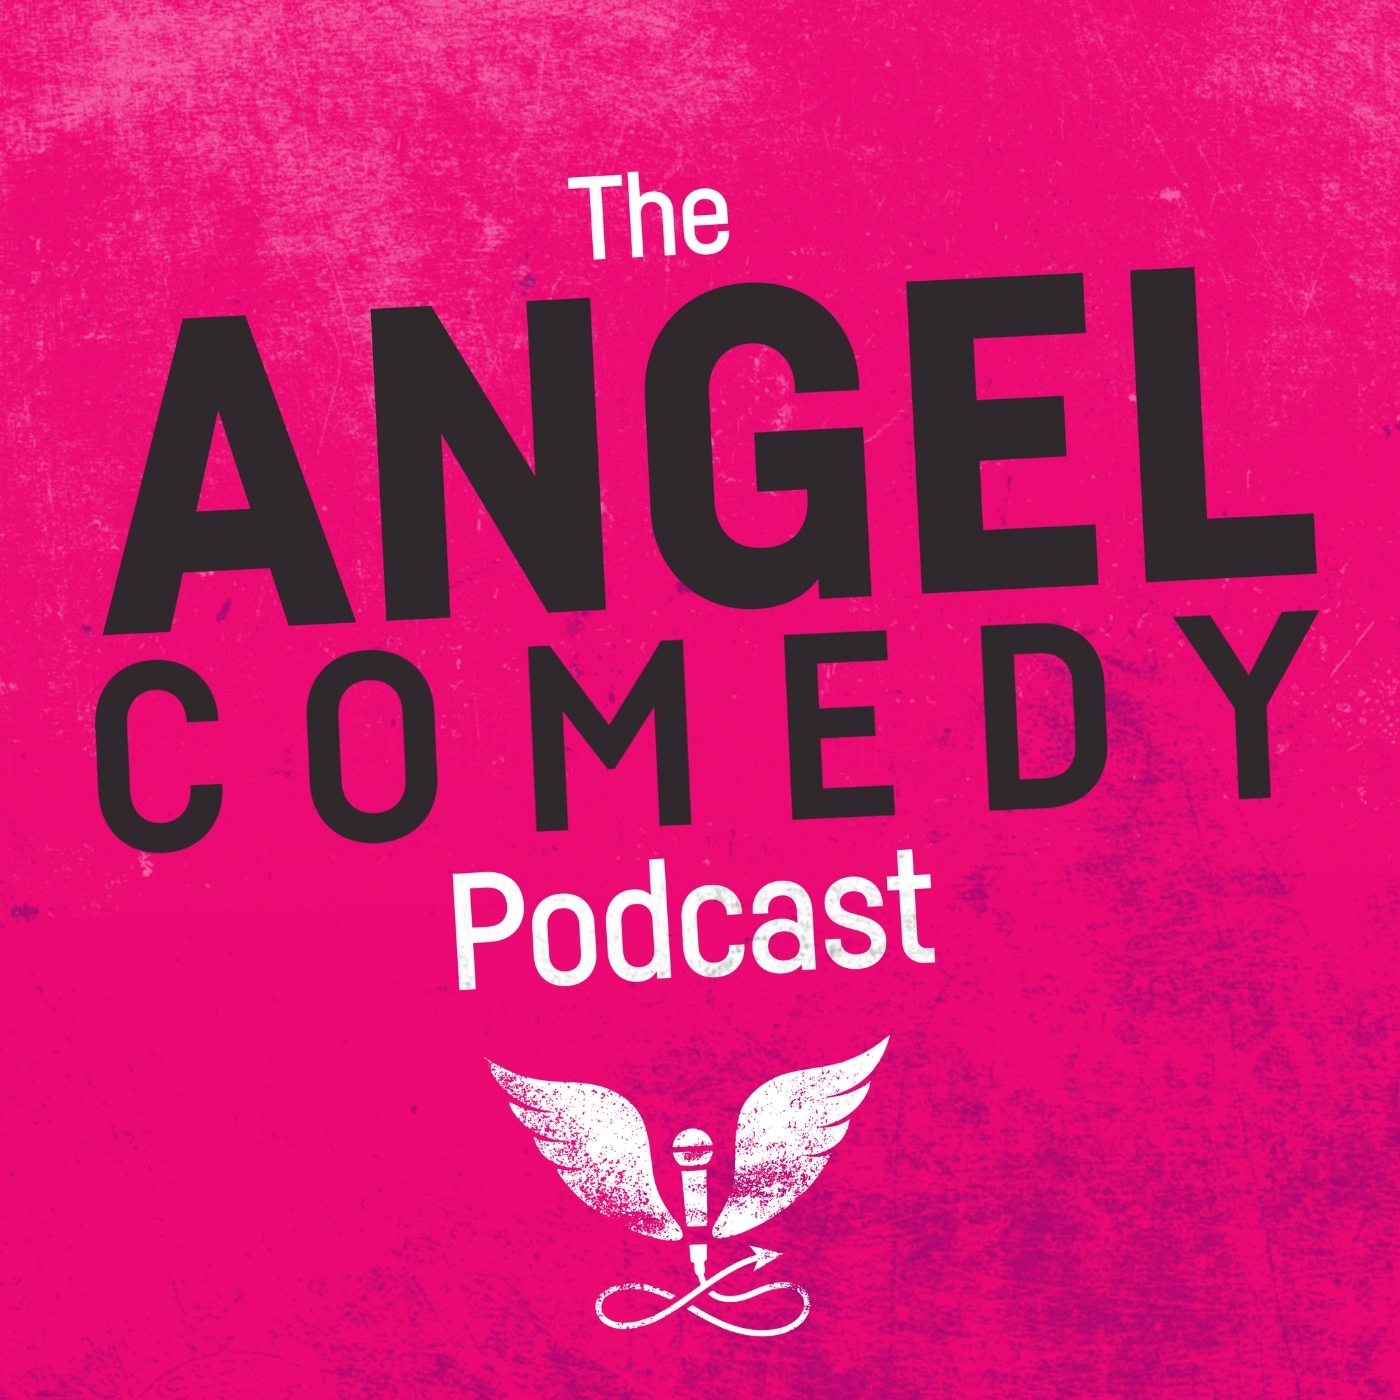 The Angel Comedy Podcast with Joz Norris